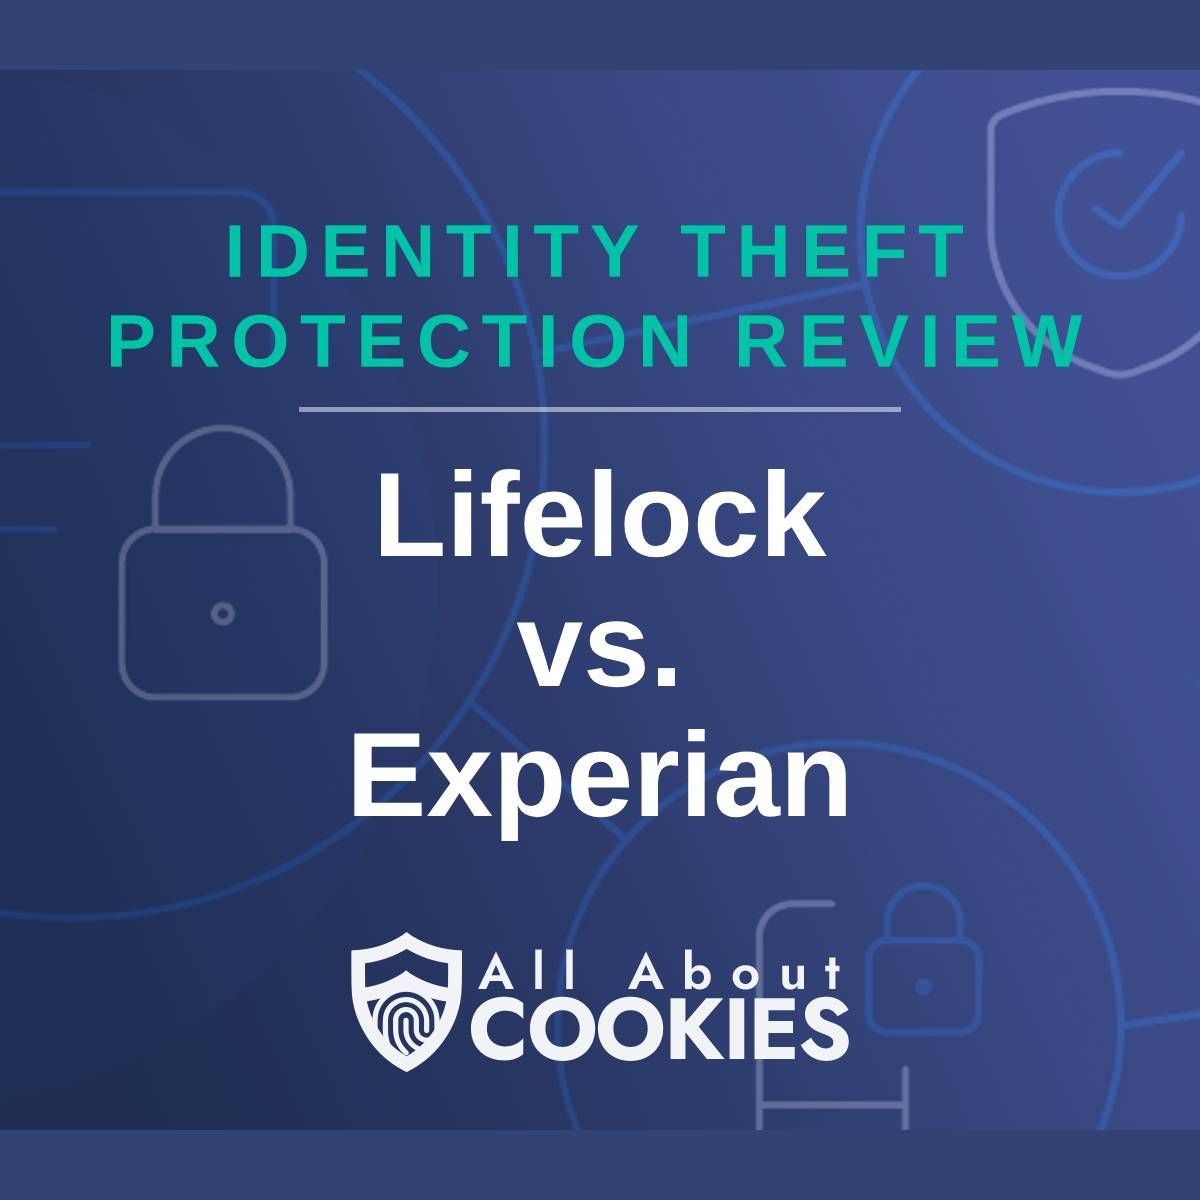 A blue background with images of locks and shields with the text &quot;Identity Theft Protection Review Lifelock vs. Experian&quot; and the All About Cookies logo. 